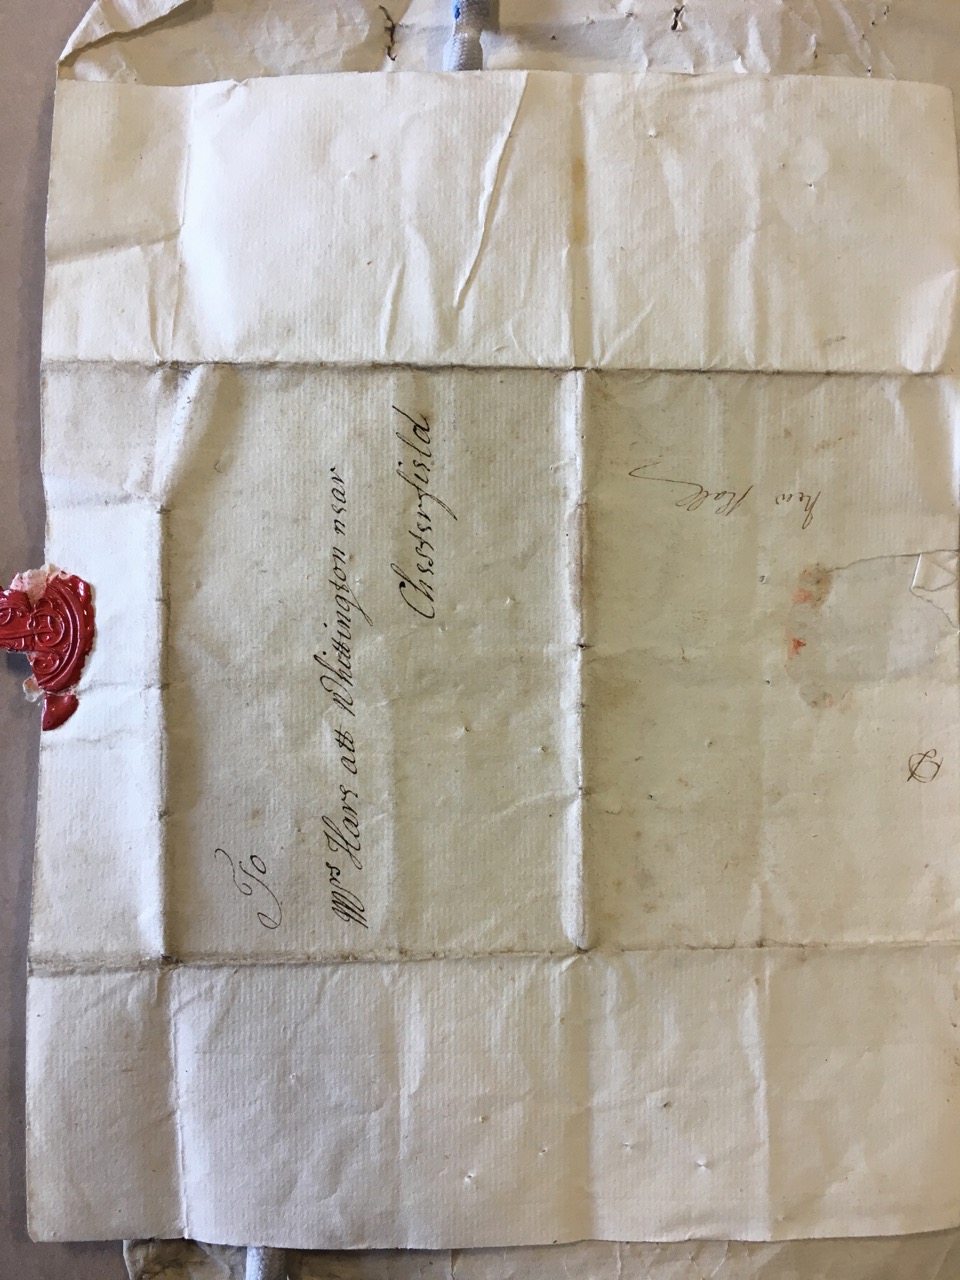 Image #2 of letter: Elizabeth Hare to Ann Hare, 13 February 1772